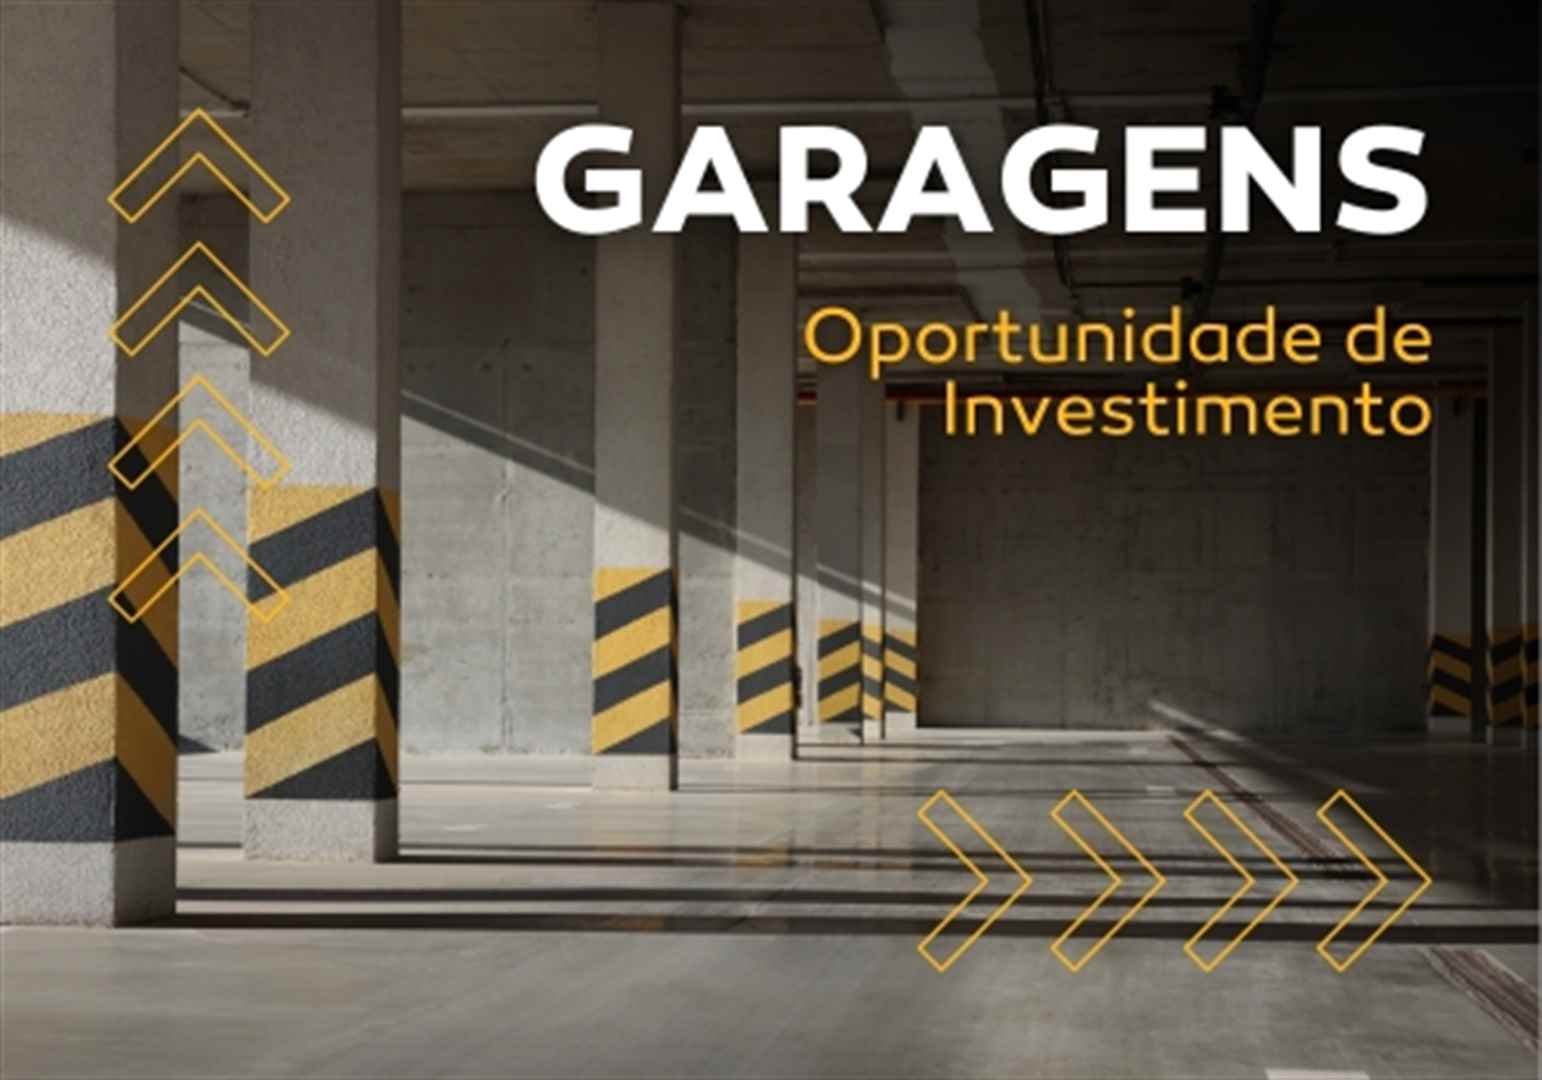 Garages, Investment Opportunity